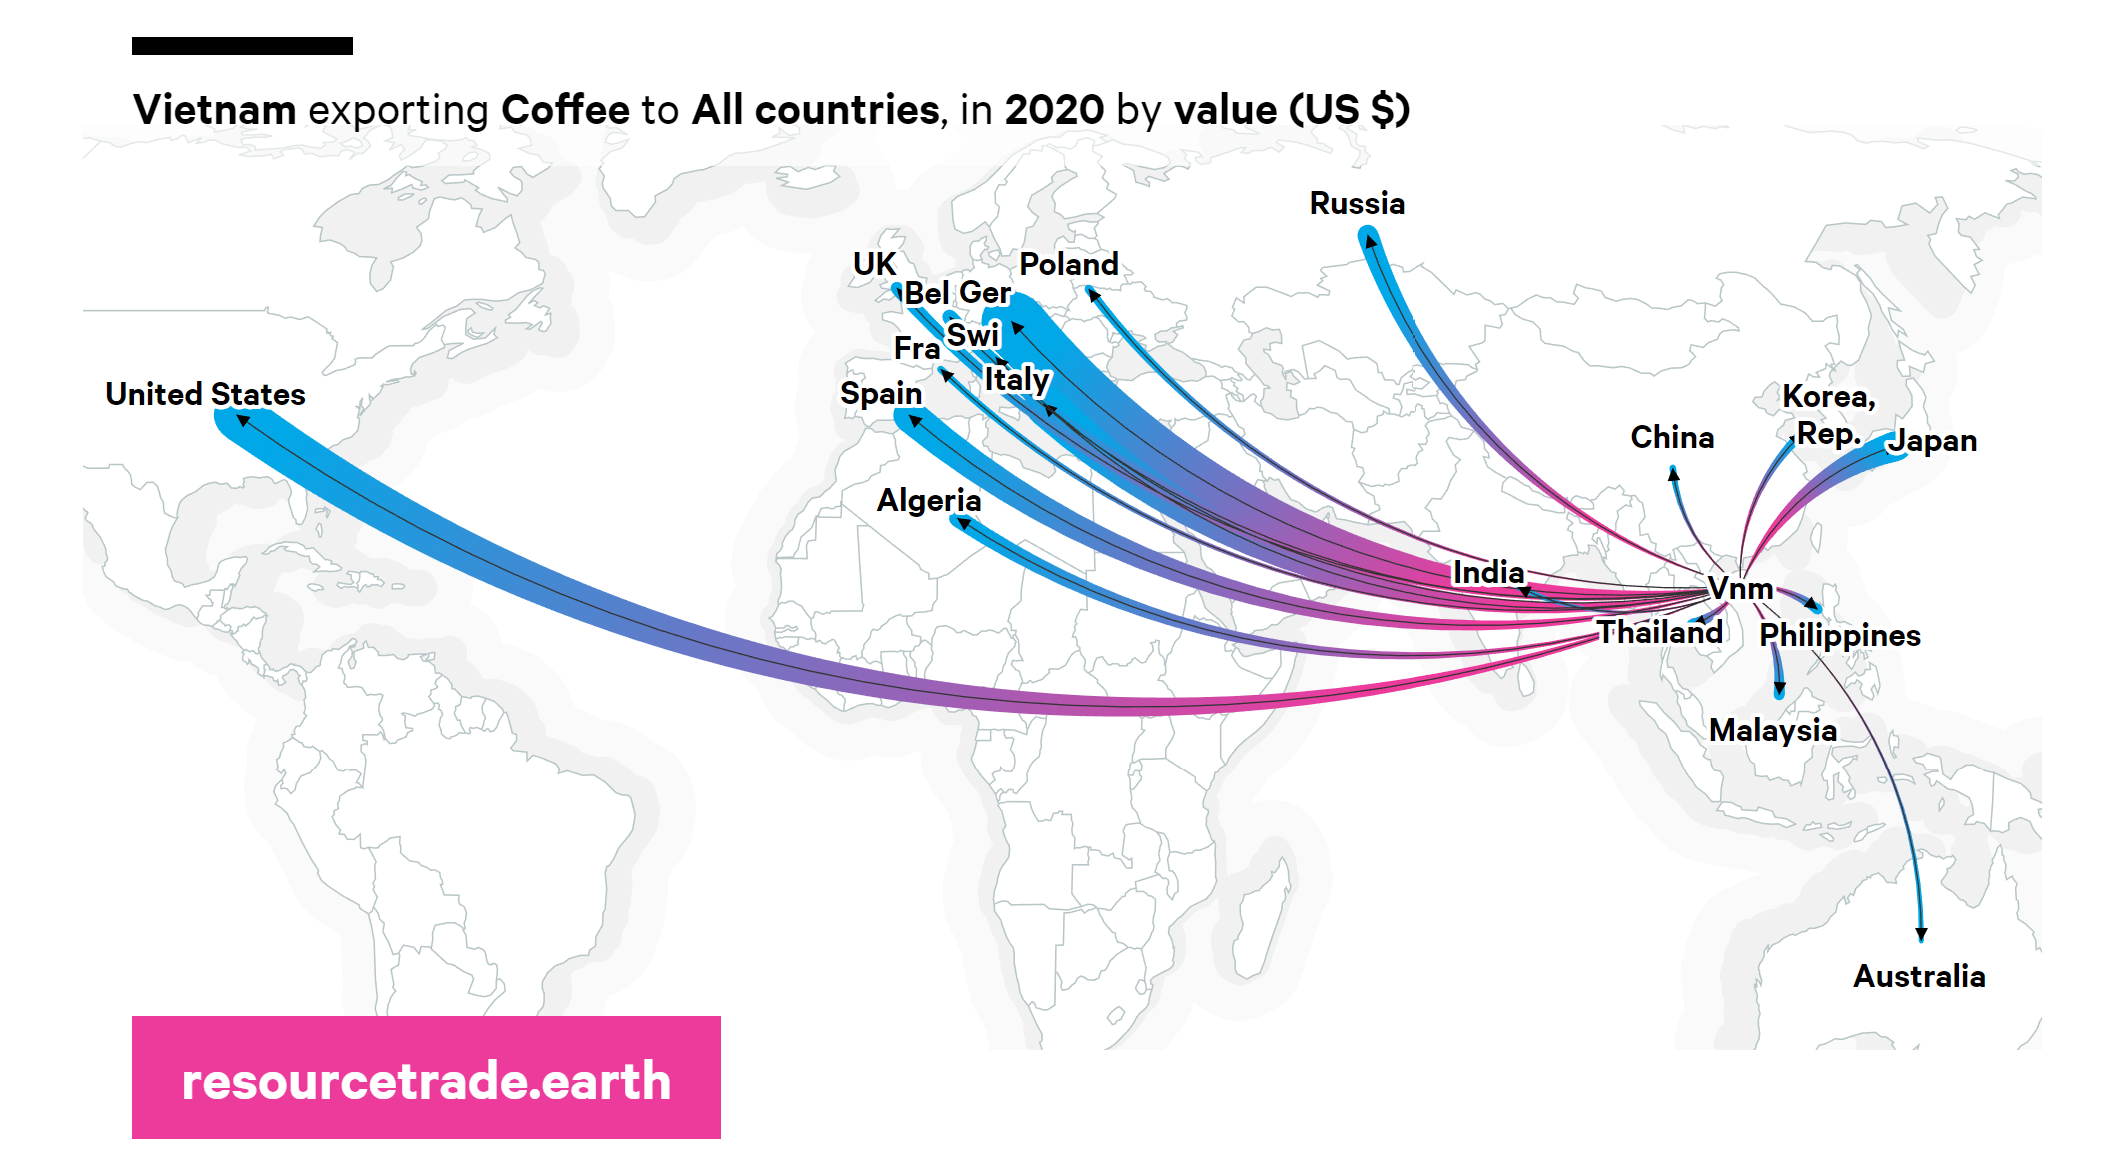 A map of Vietnam's coffee exports